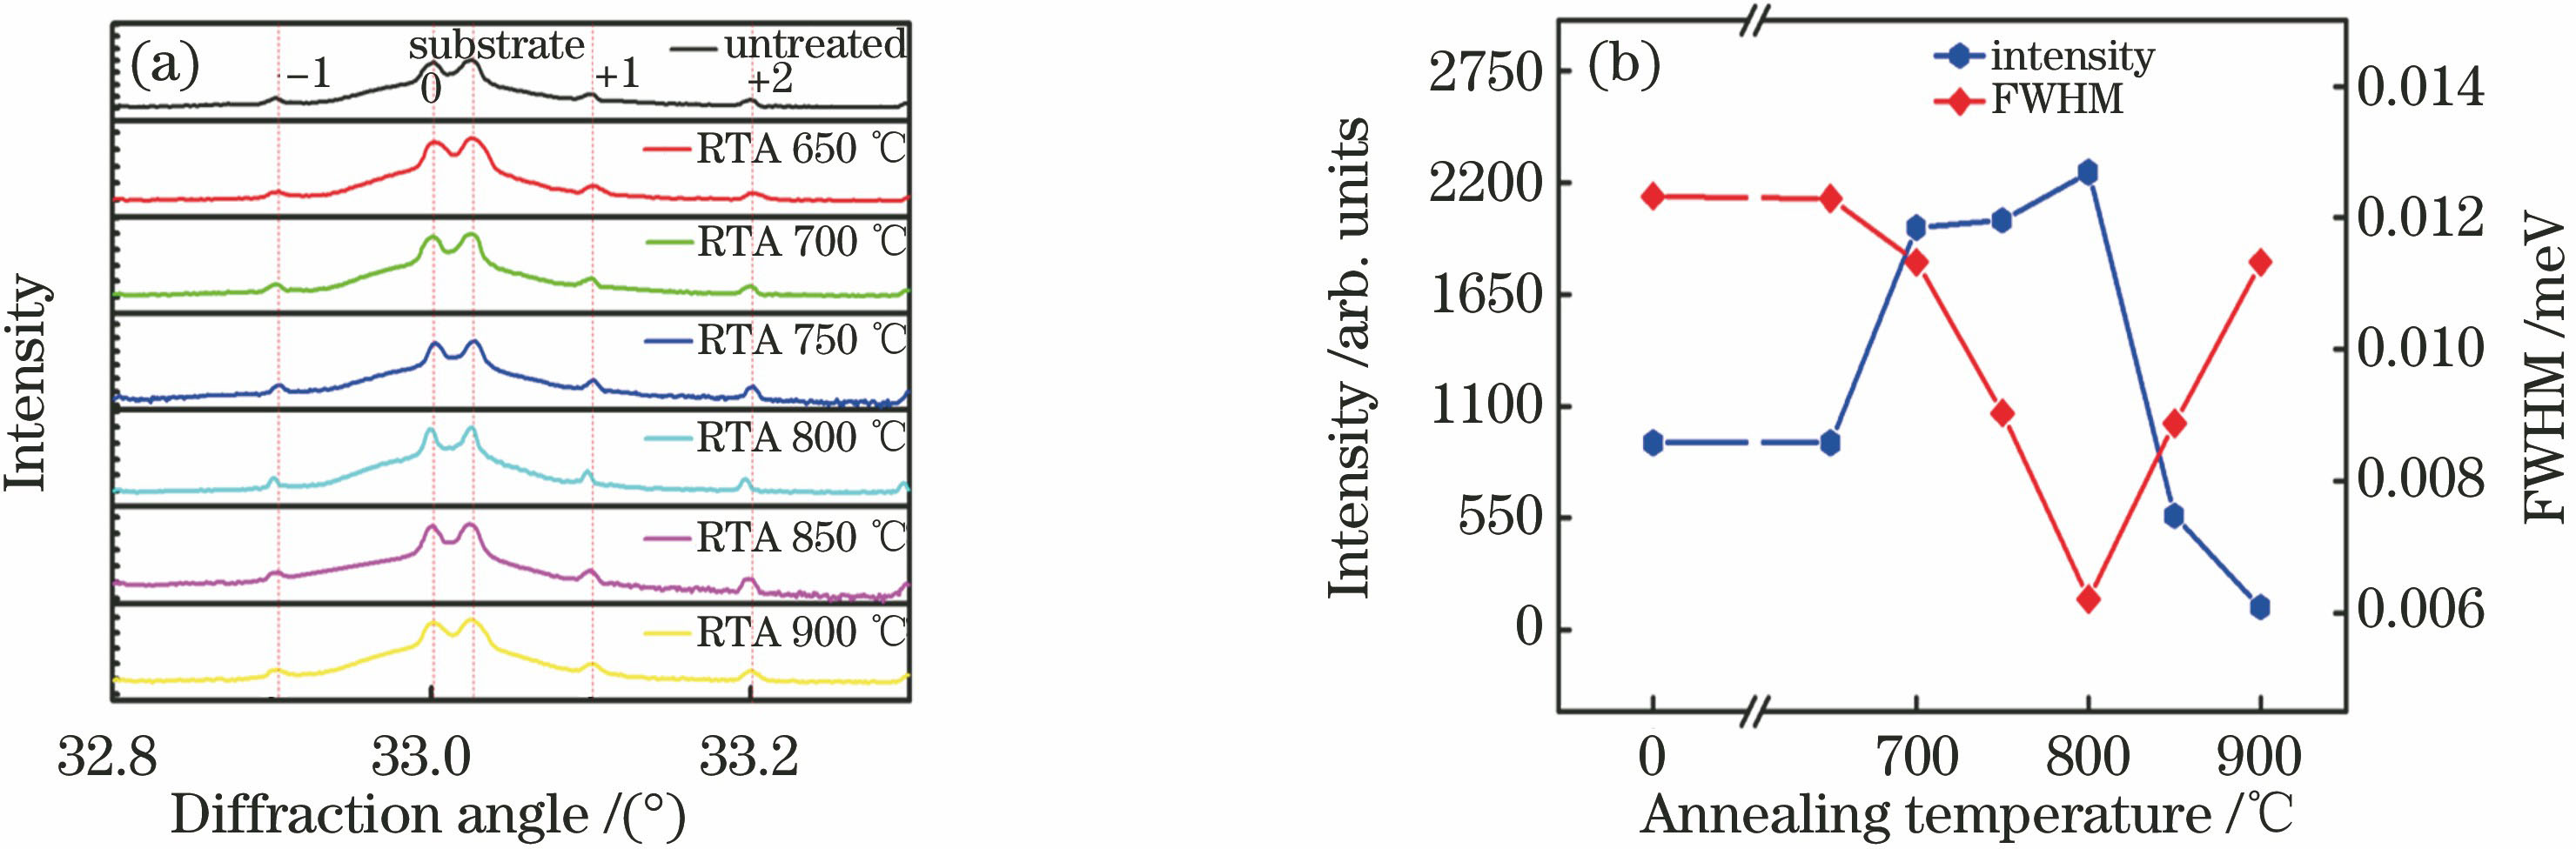 (a) XRD patterns of different samples; (b) FWHM and +1 diffraction peak intensity of samples under different annealing temperatures